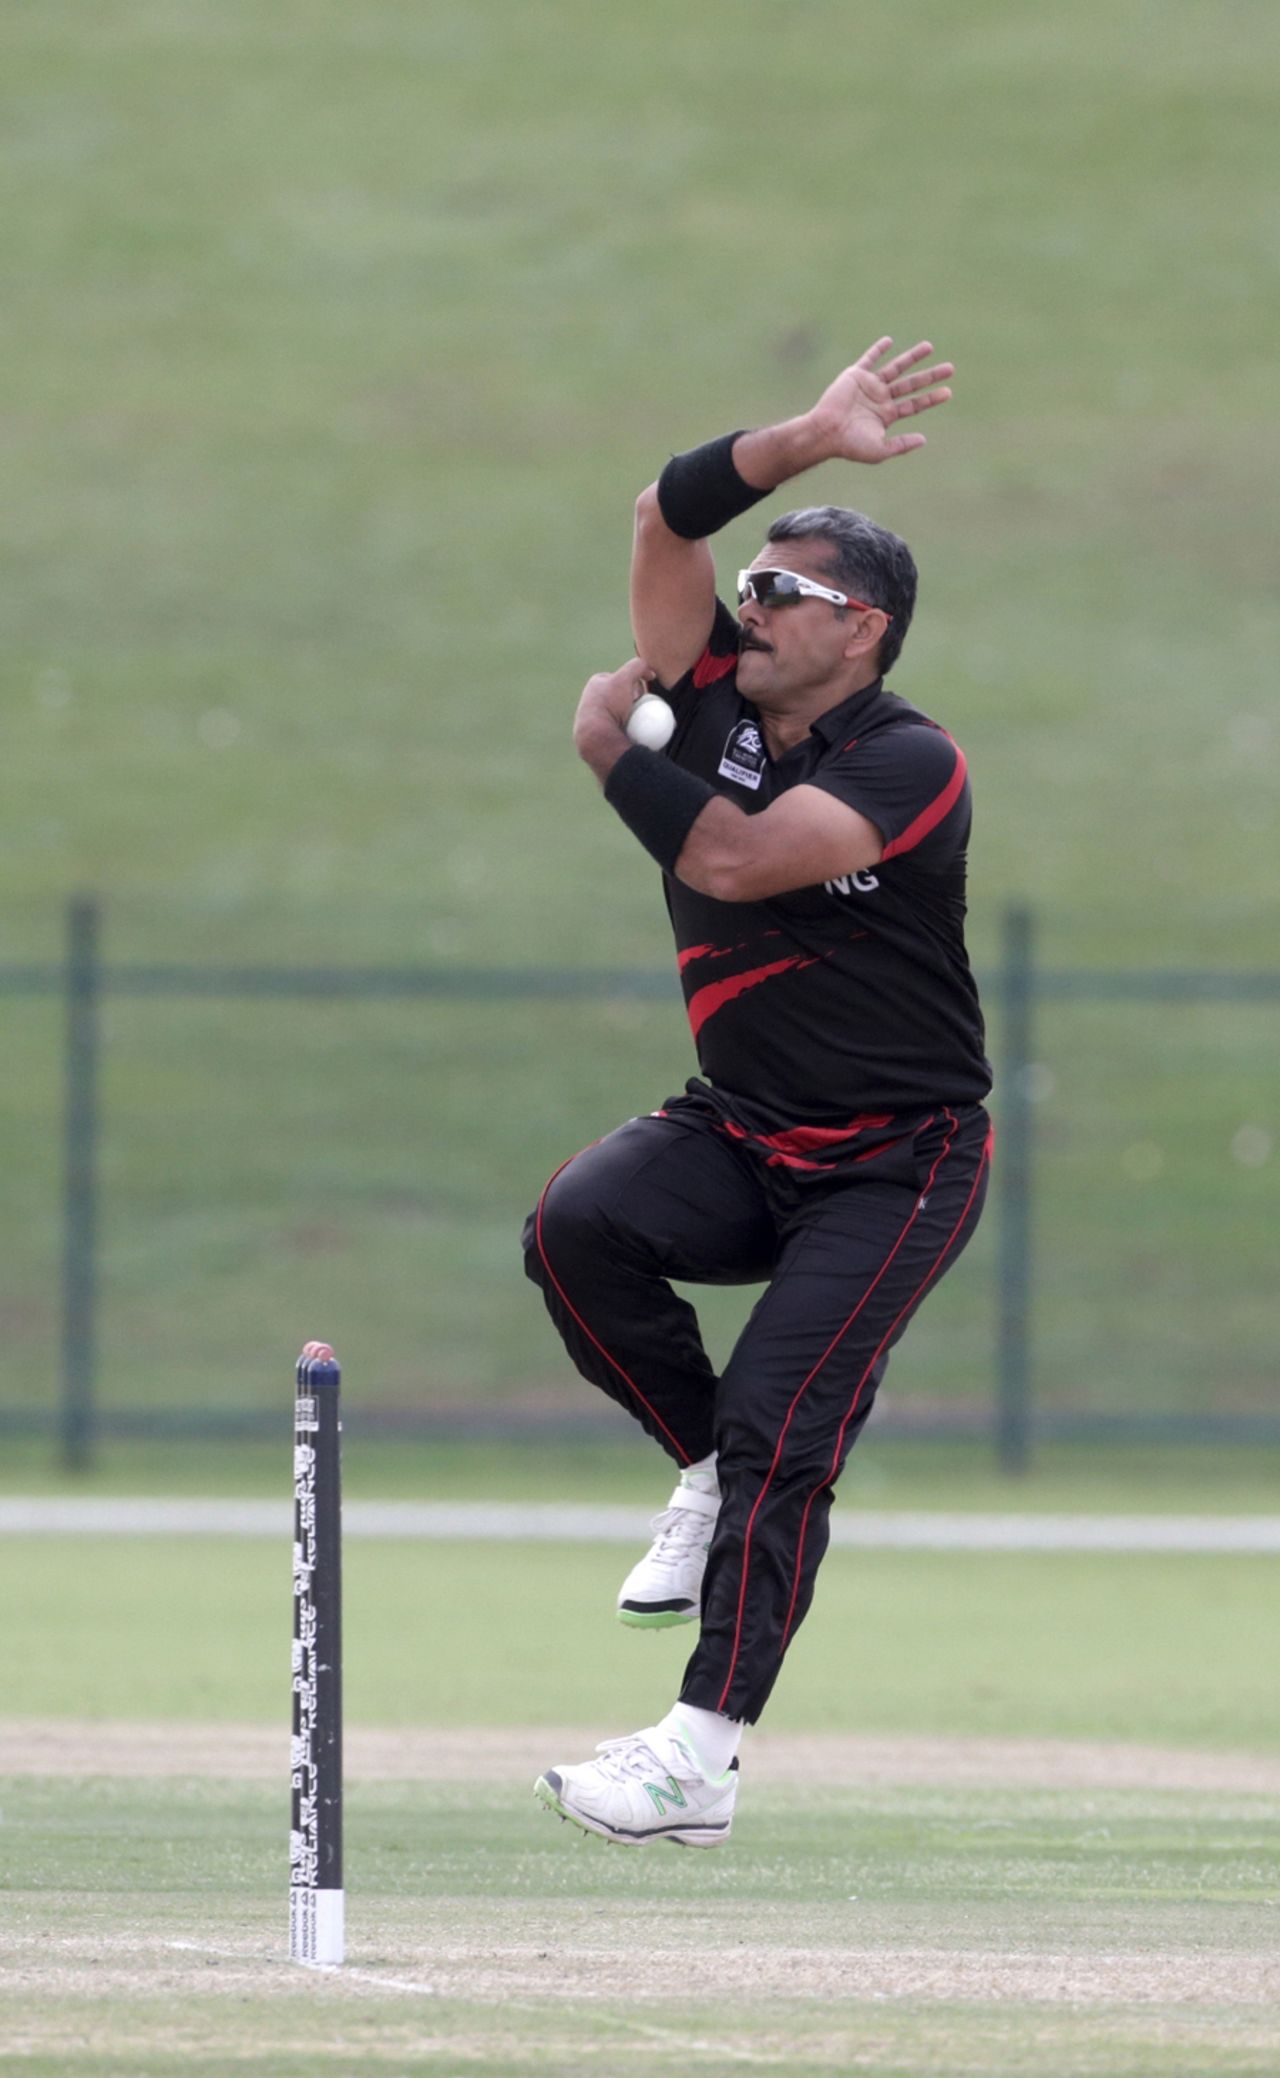 Moner Ahmed of Hong Kong comes in to bowl during ICC World Twenty20 Qualifier between Ireland and Hong Kong at the Zayed Cricket Stadium on November 24, 2013 in Abu Dhabi, United Arab Emirates. (Photo by Graham Crouch-IDI/IDI via Getty Images)
